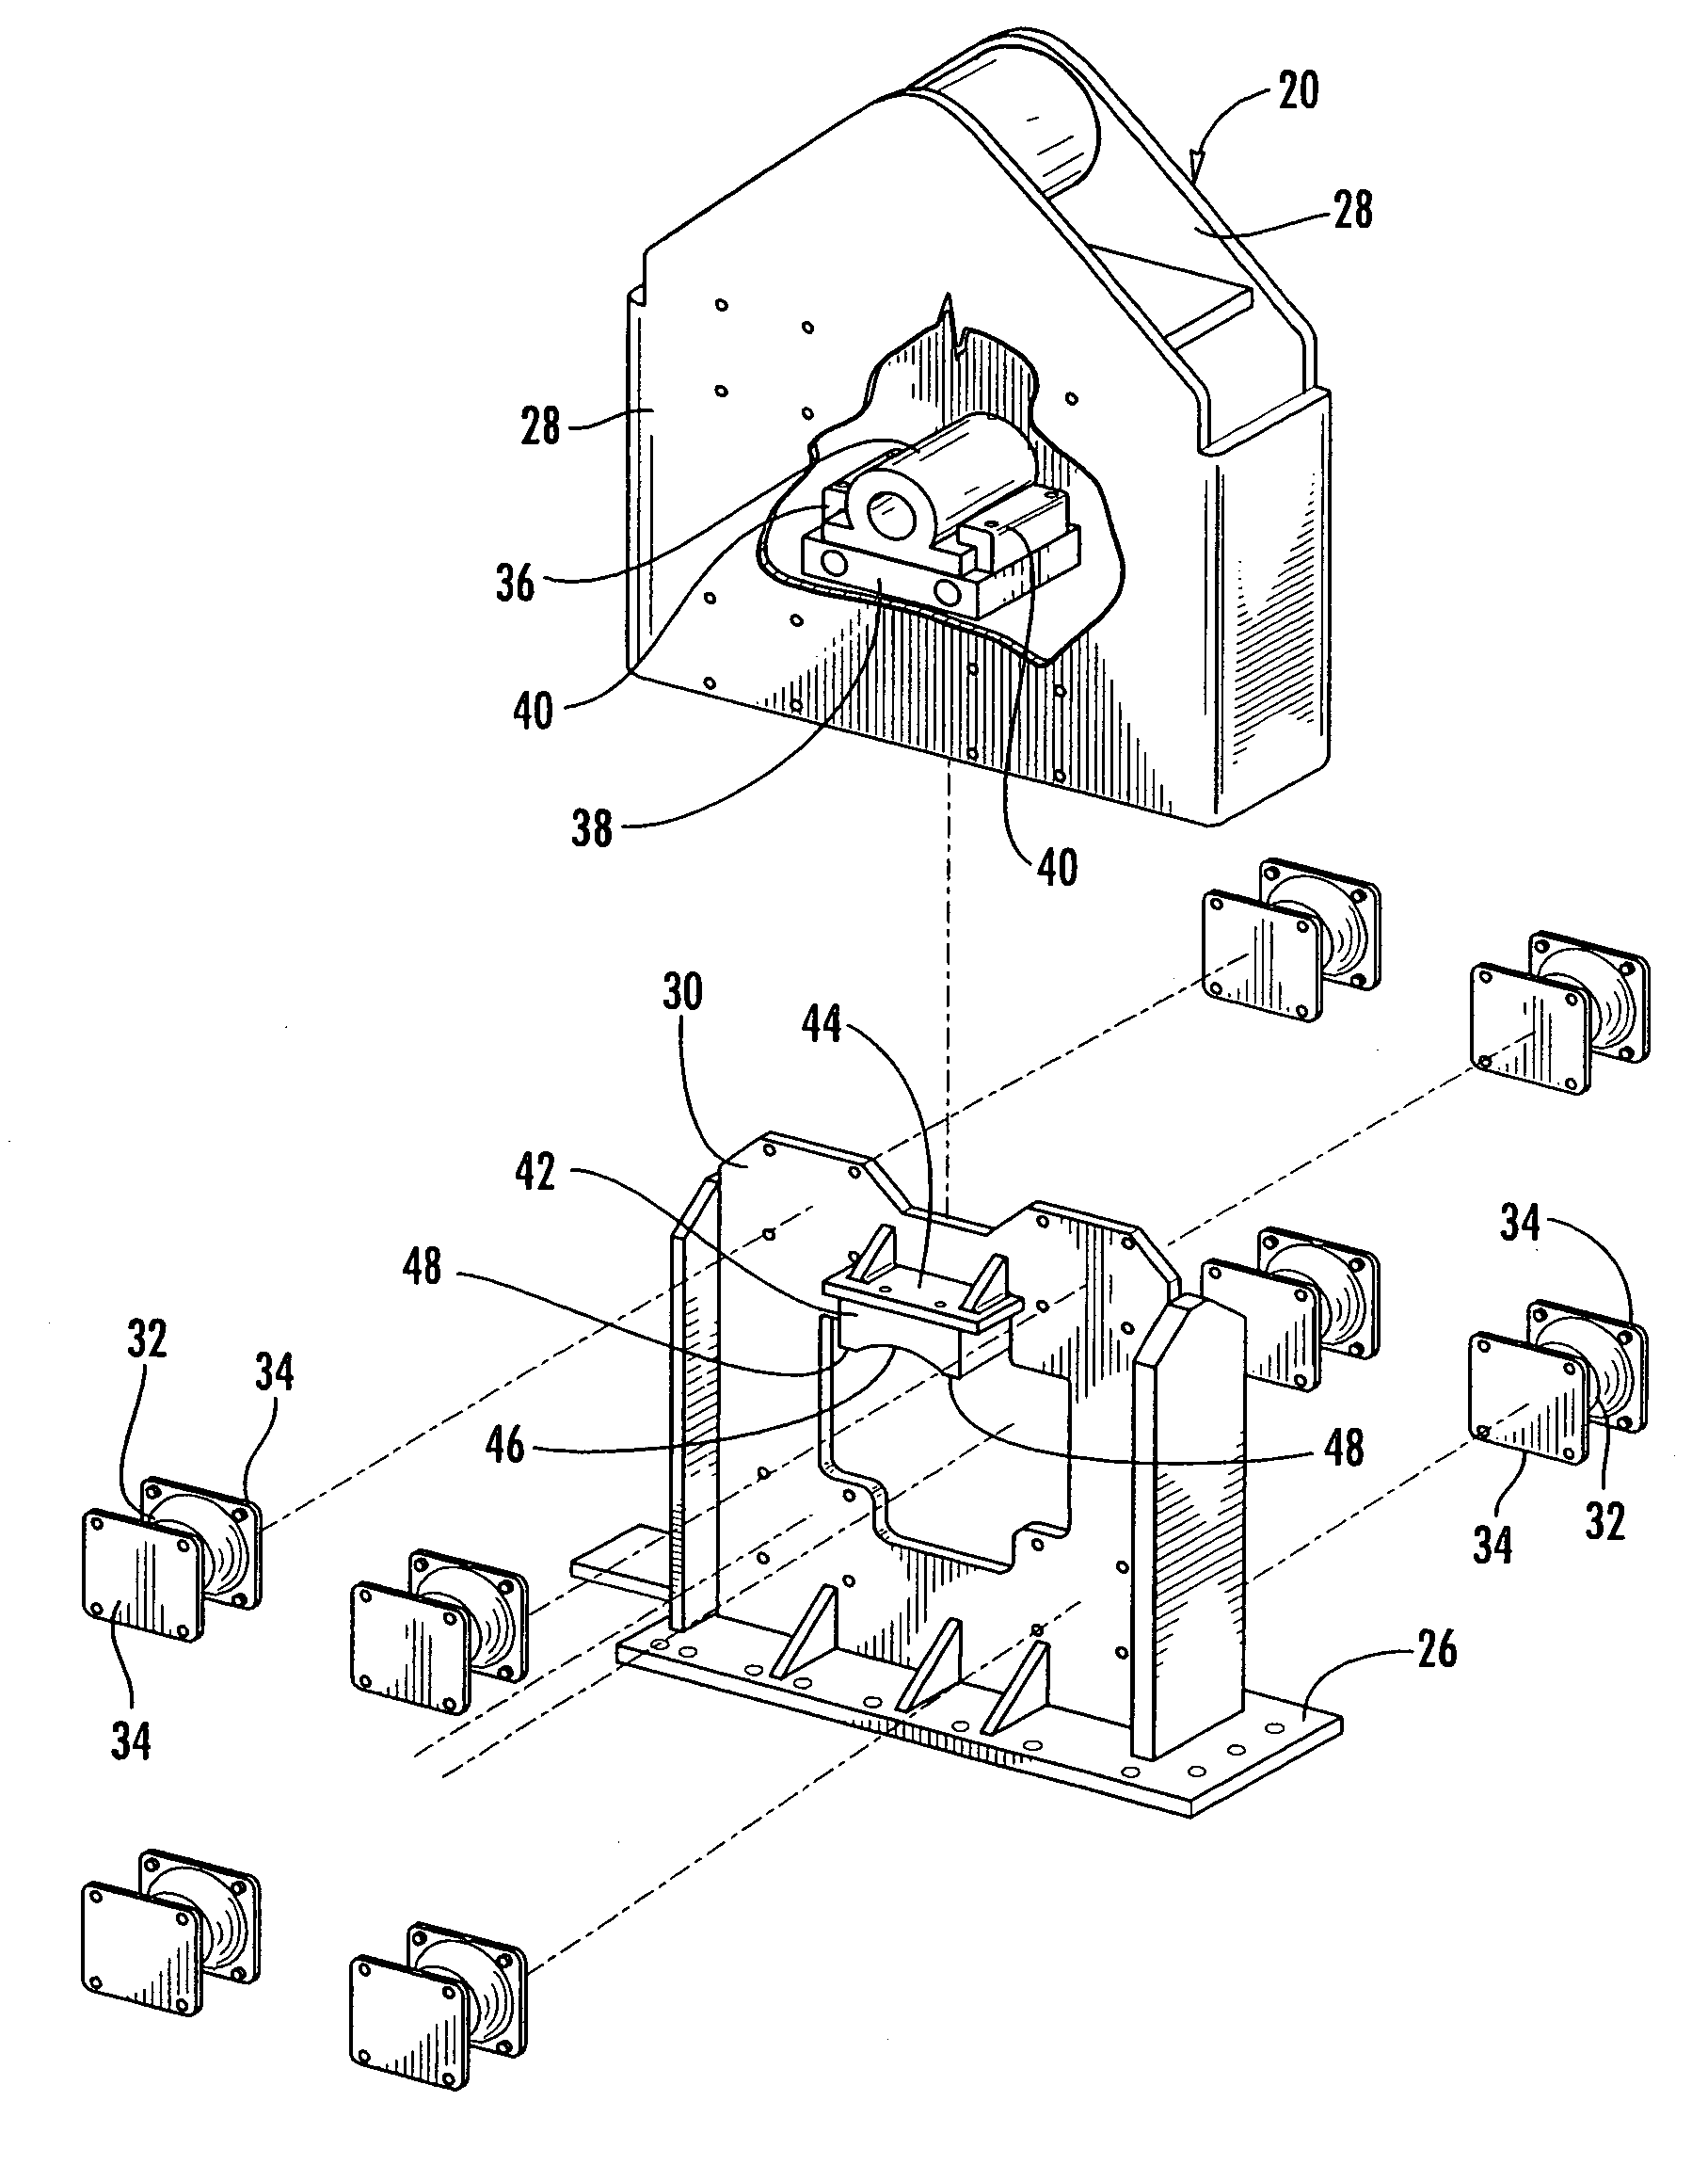 Vibratory pile driver/extractor with two-stage vibration/tension load suppressor